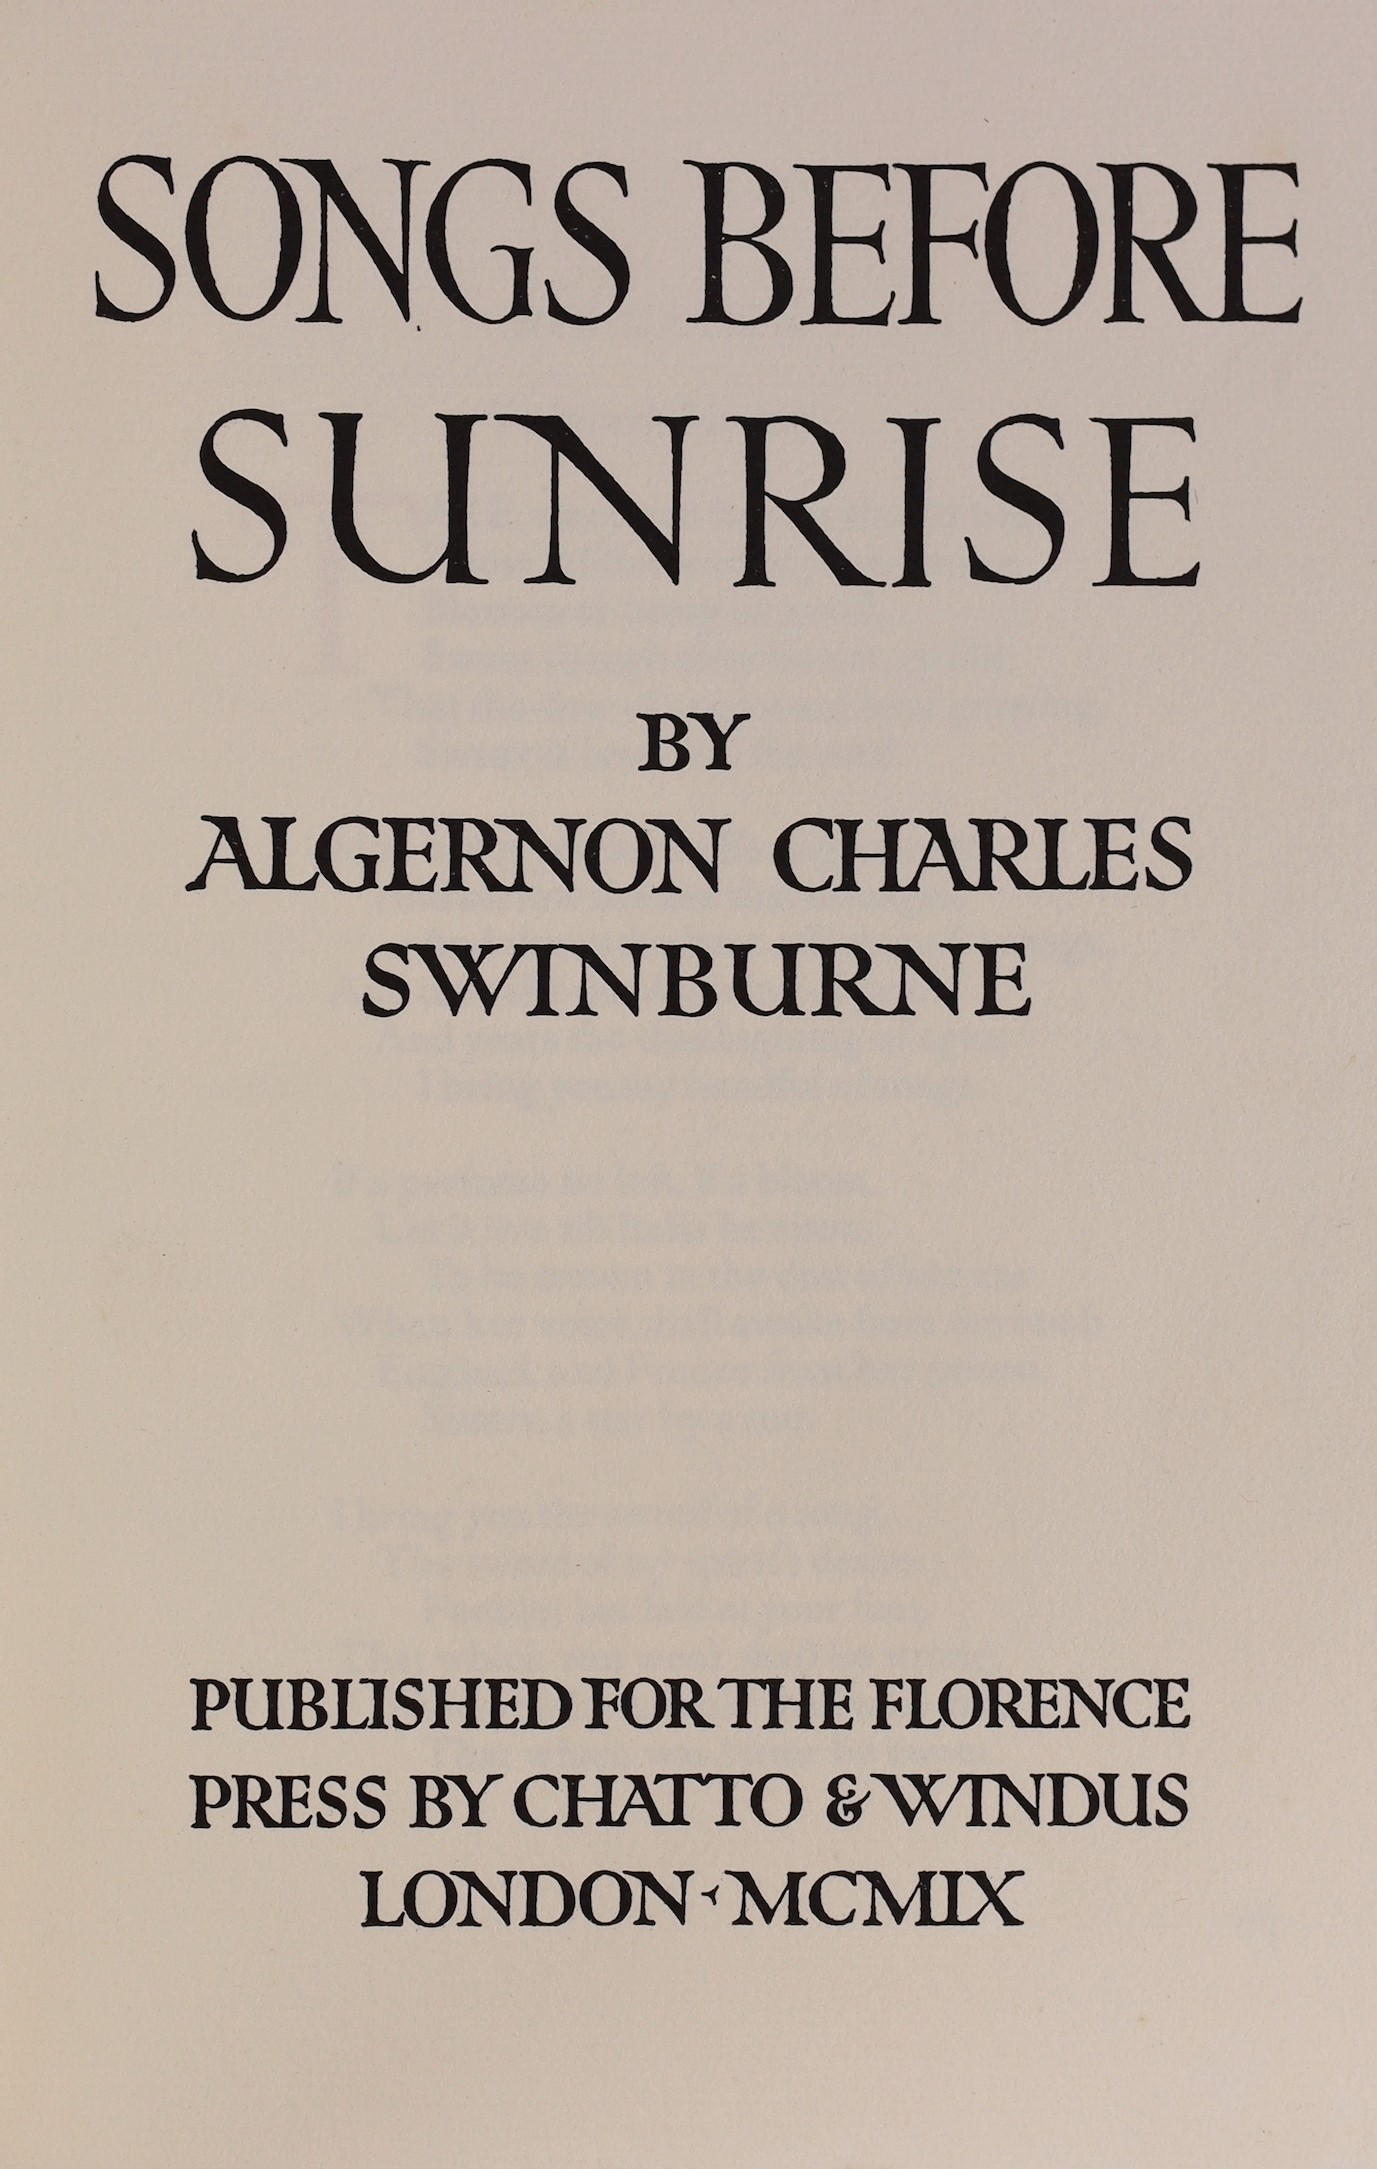 Swinburne, Algernon Charles - Songs before Sunrise, one of 650, 4to, limp vellum with gilt lettering, silk ties, small water stain to lower centre of early leaves, published for the Florence Press by Chatto and Windus, L